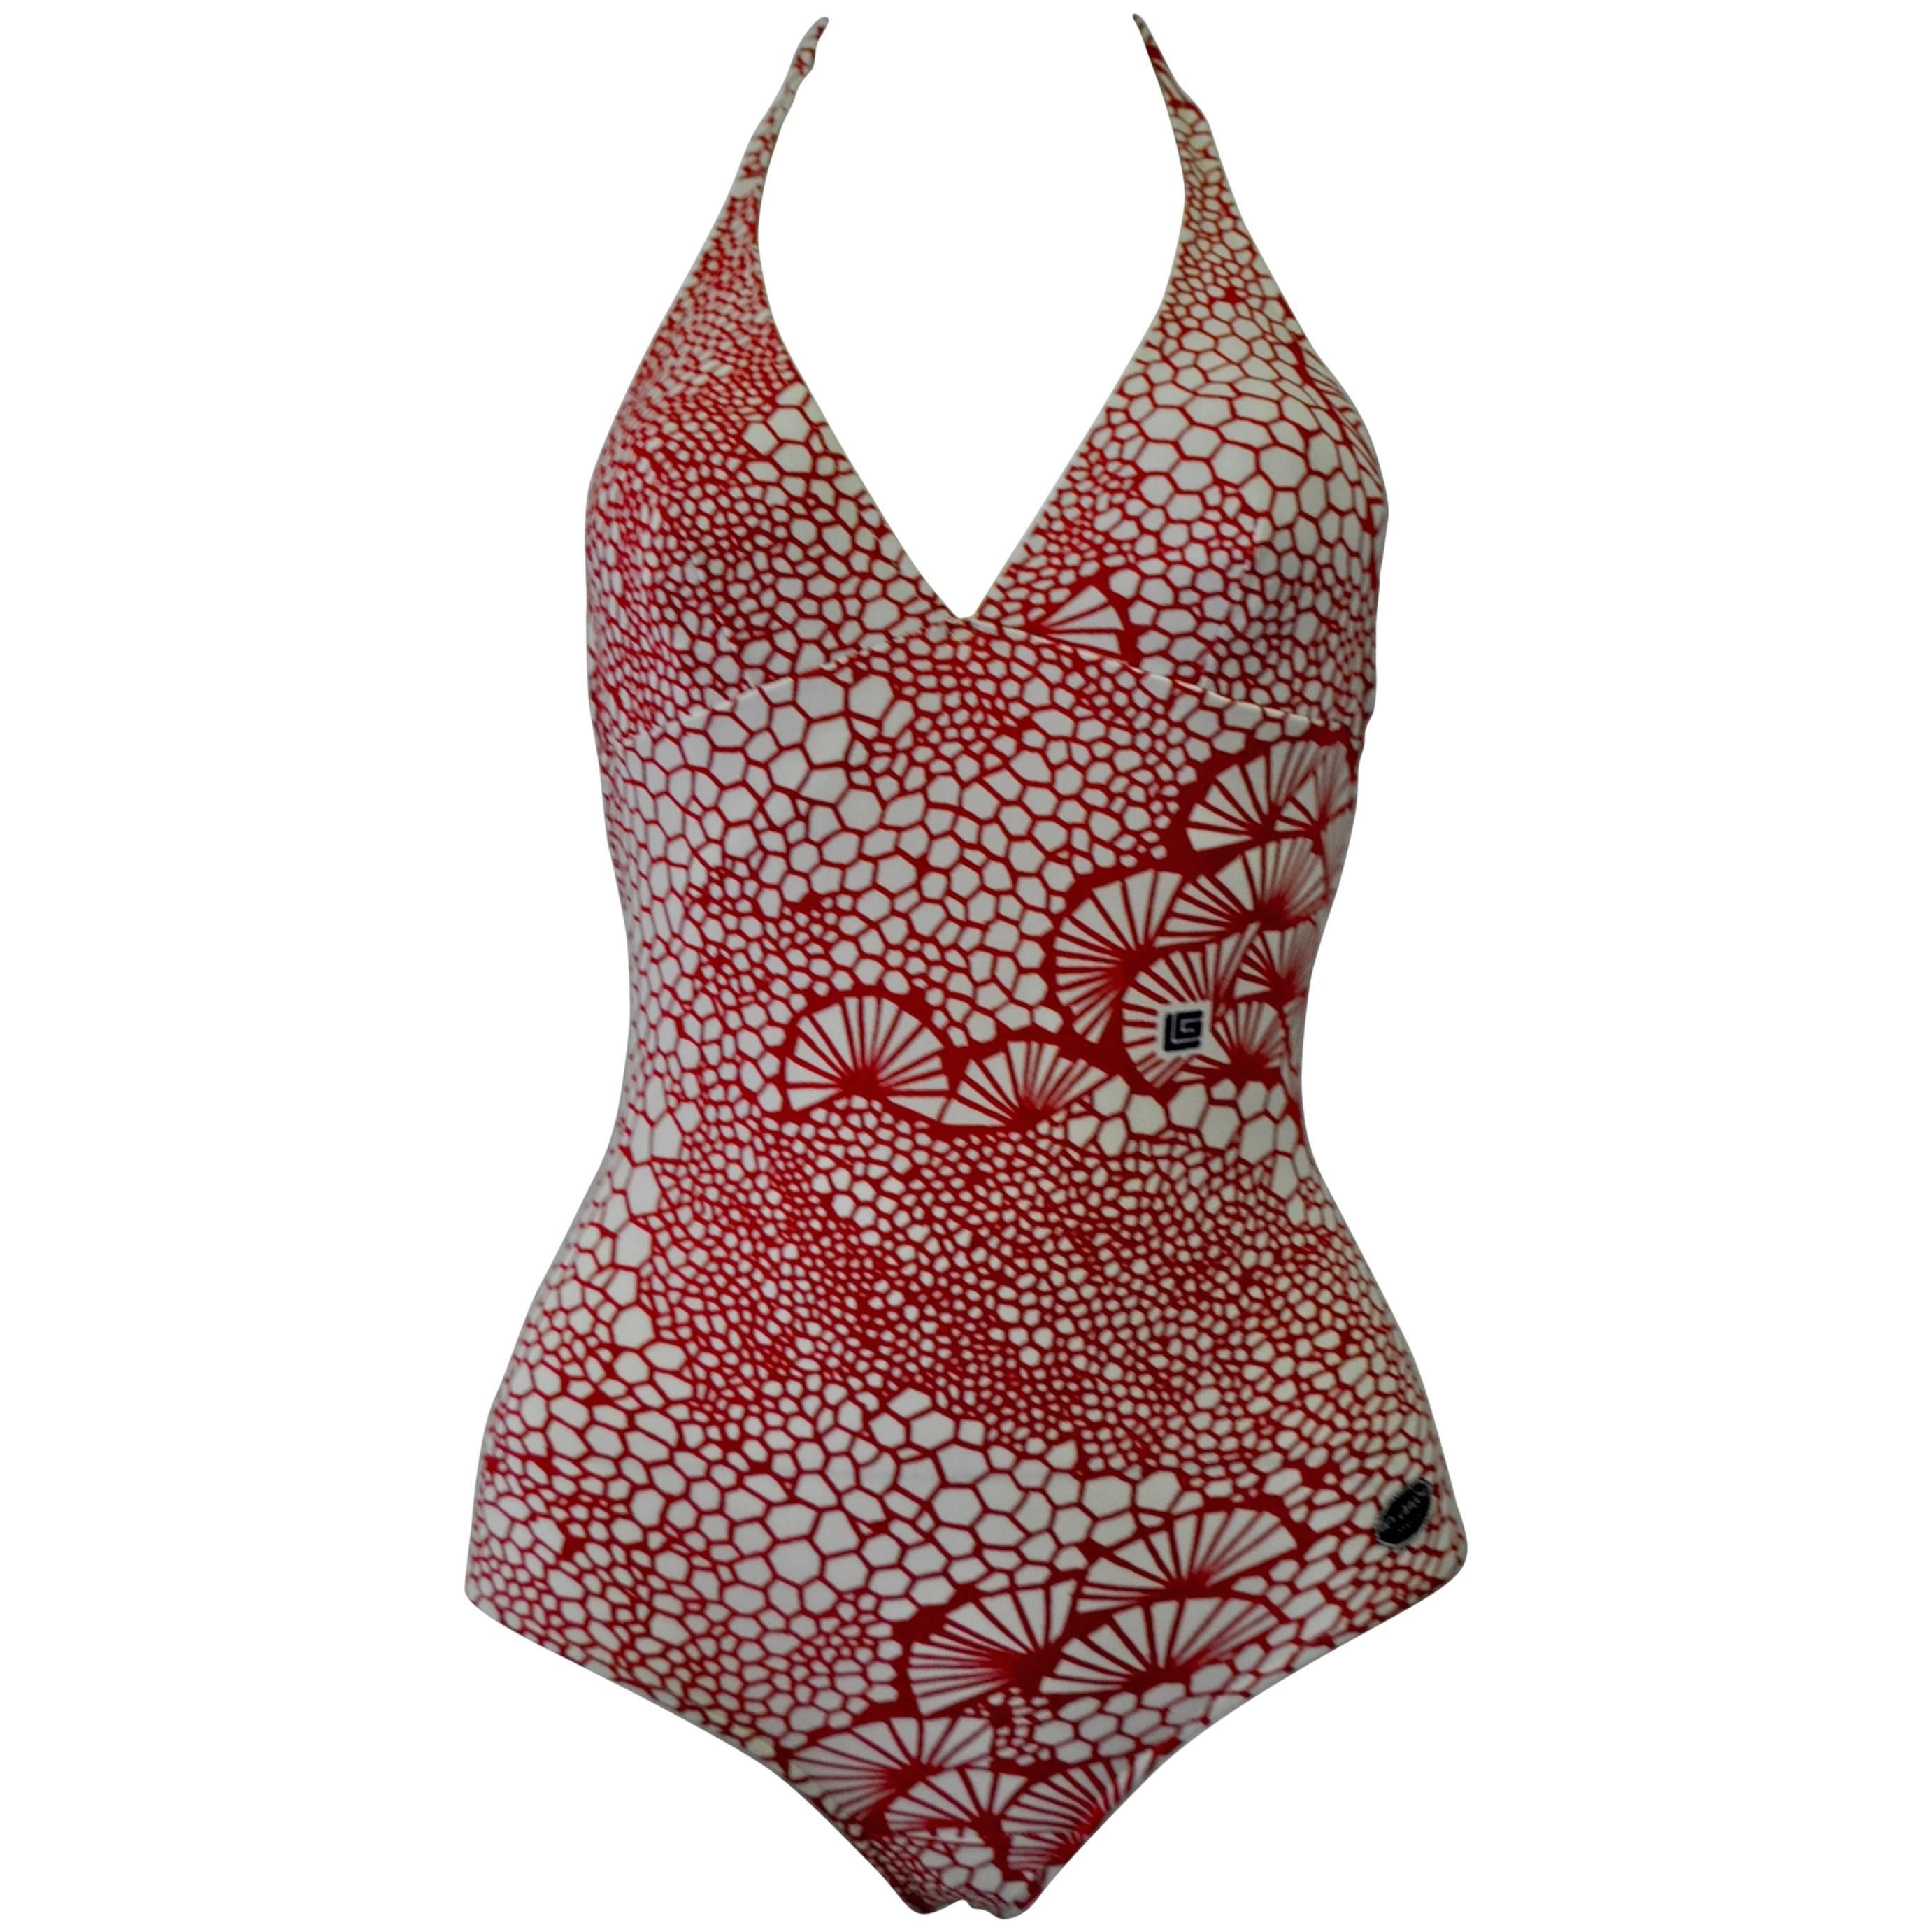 Guy Laroche Nippon Inspired Print Swimsuit Featuring Rare Initials Logo For Sale